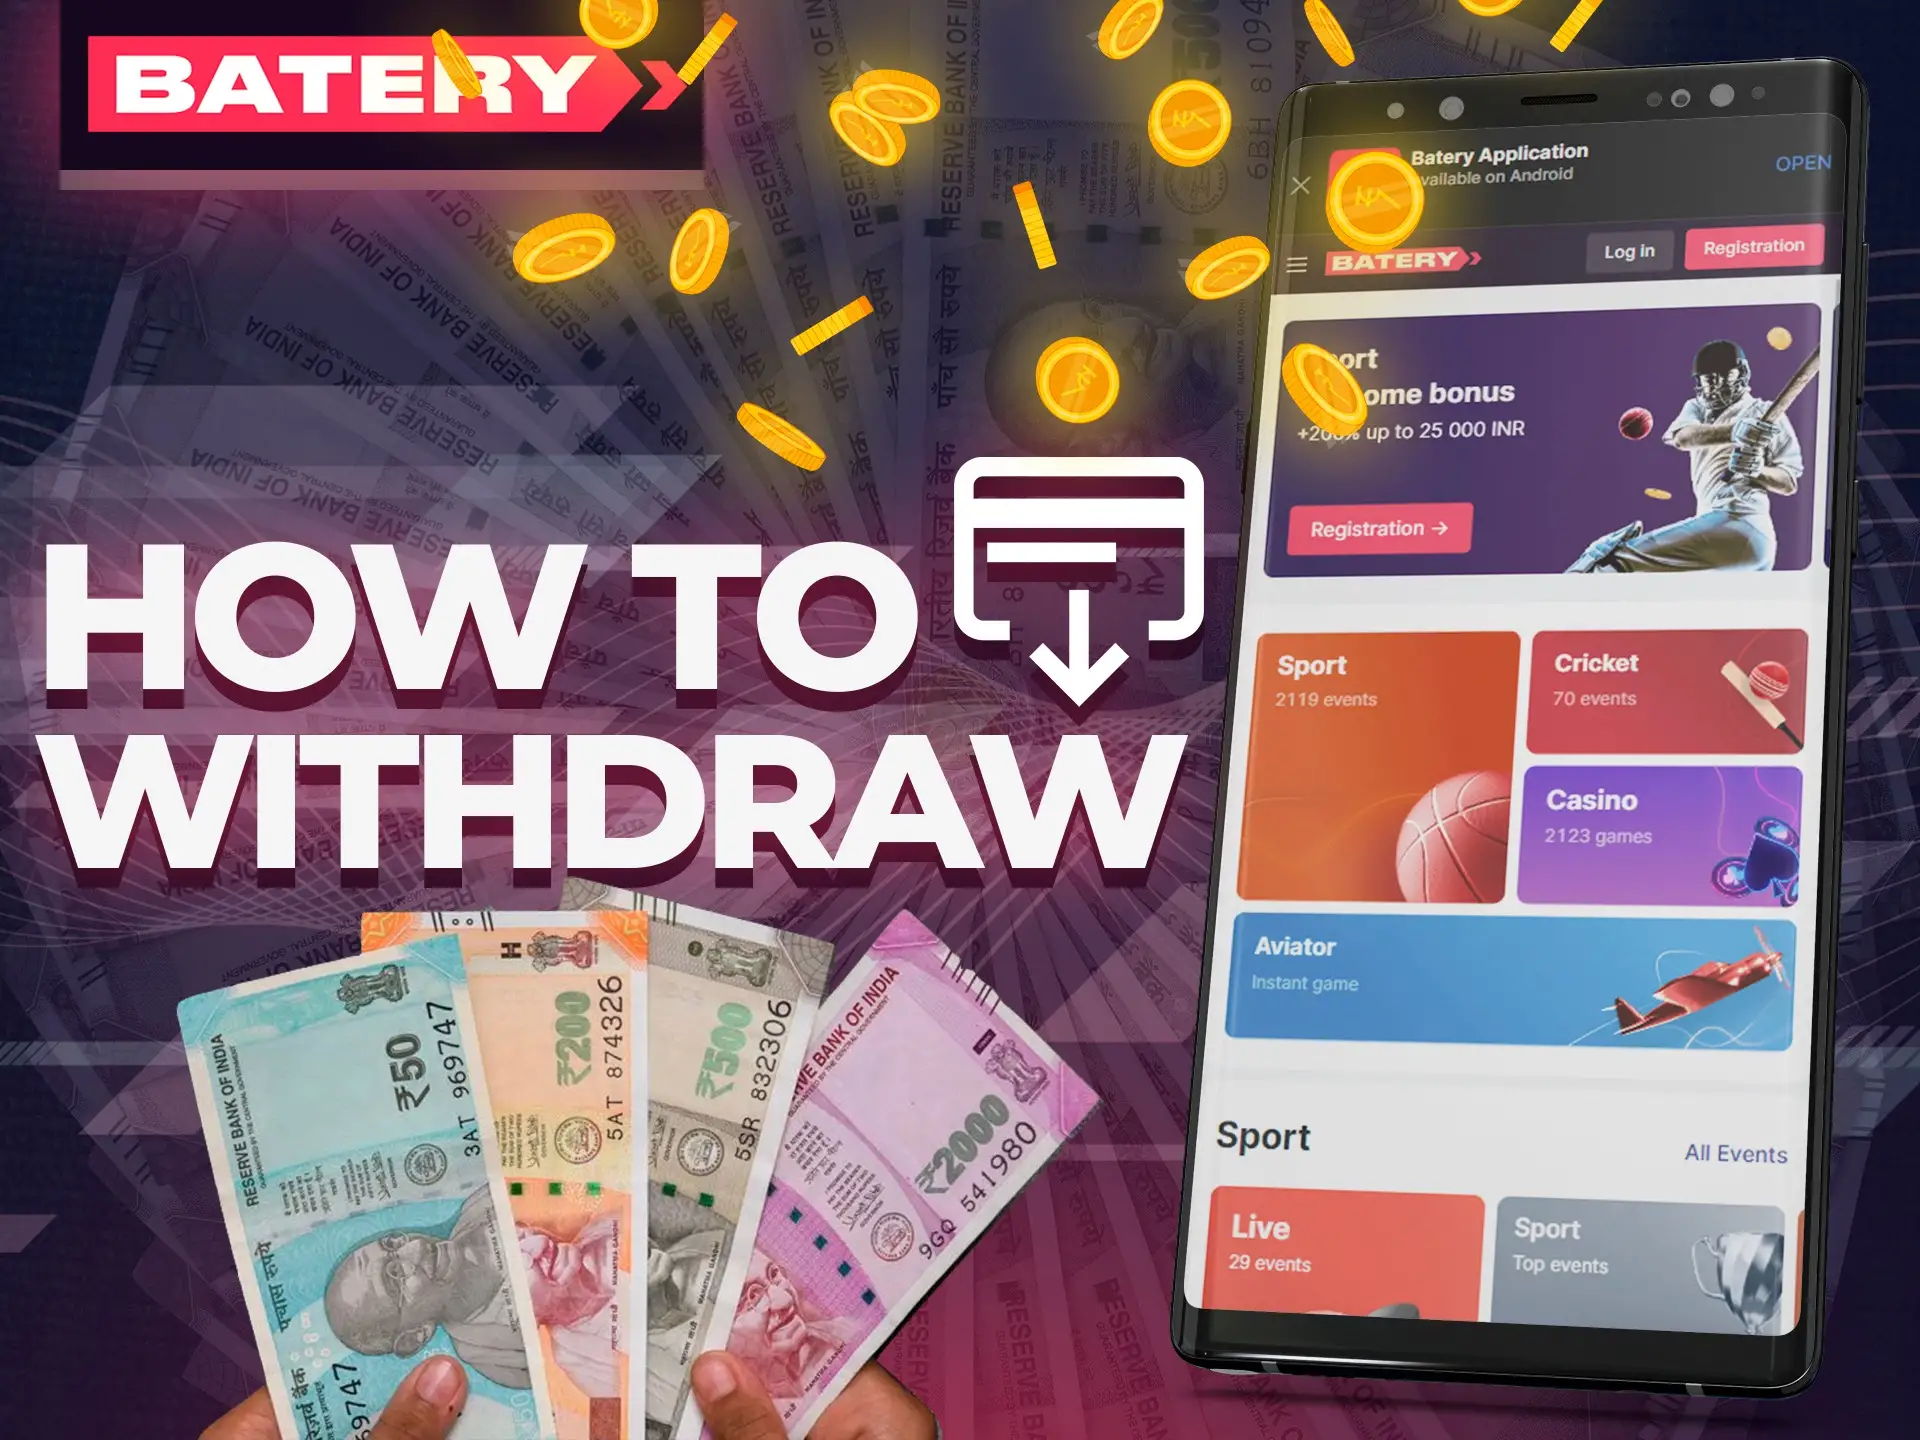 Withdraw money from Batery using app.